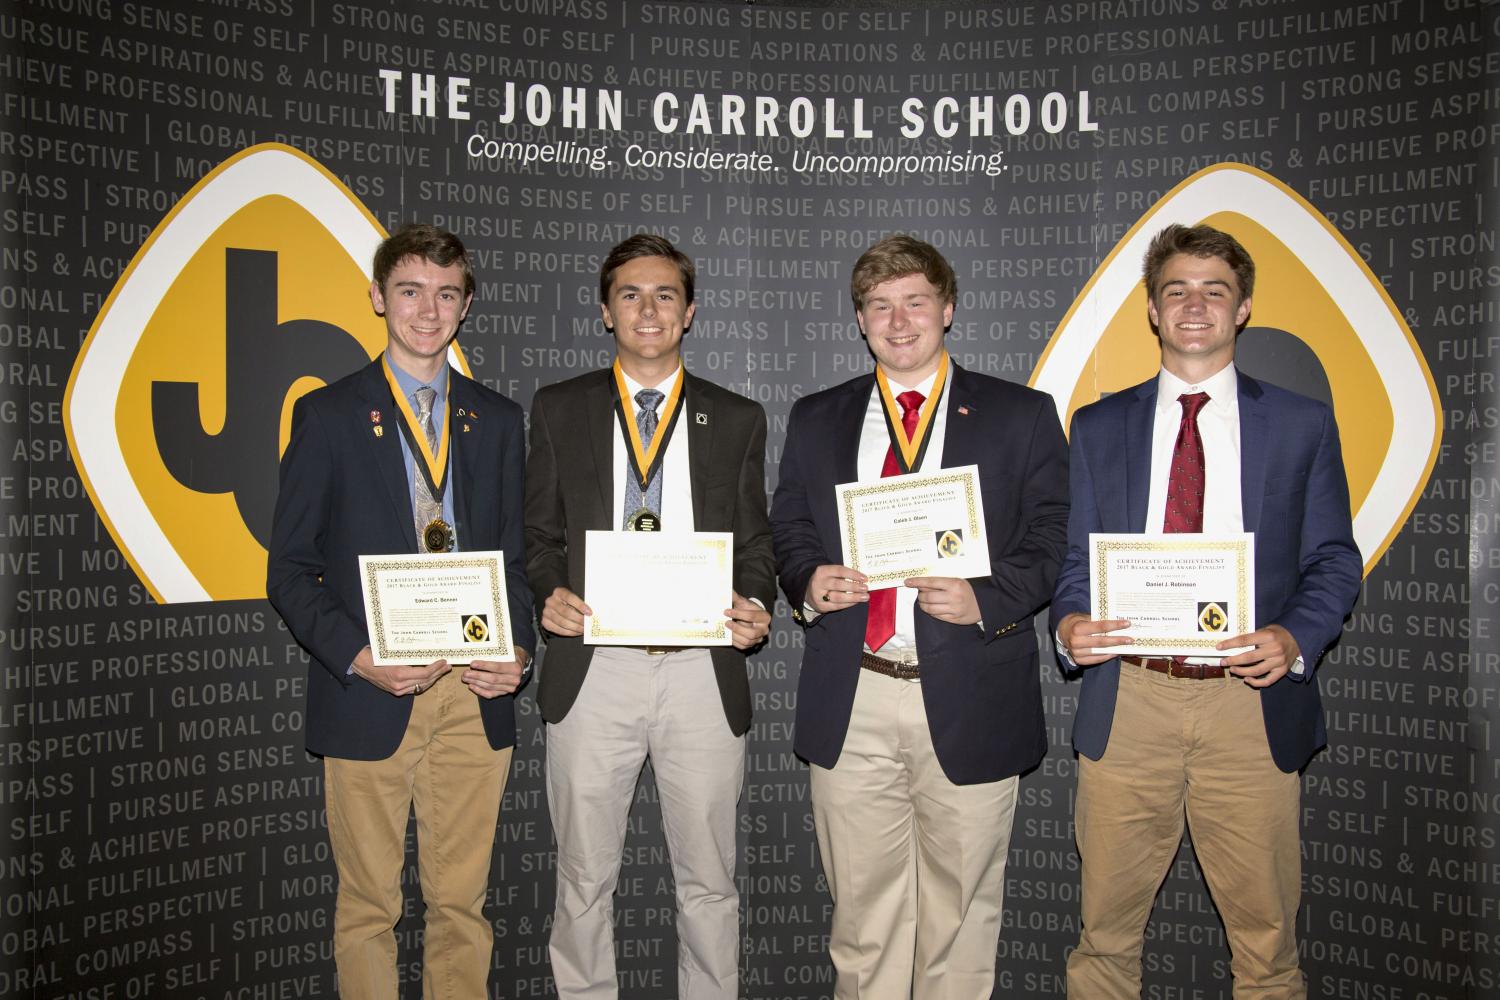 The finalists for the mens Black and Gold award pose together. Seniors Edward Benner, Nick Hinke, Caleb Olsen, and Daniel Robinson (left to right). The winner will be announced on Wednesday, May 24. 